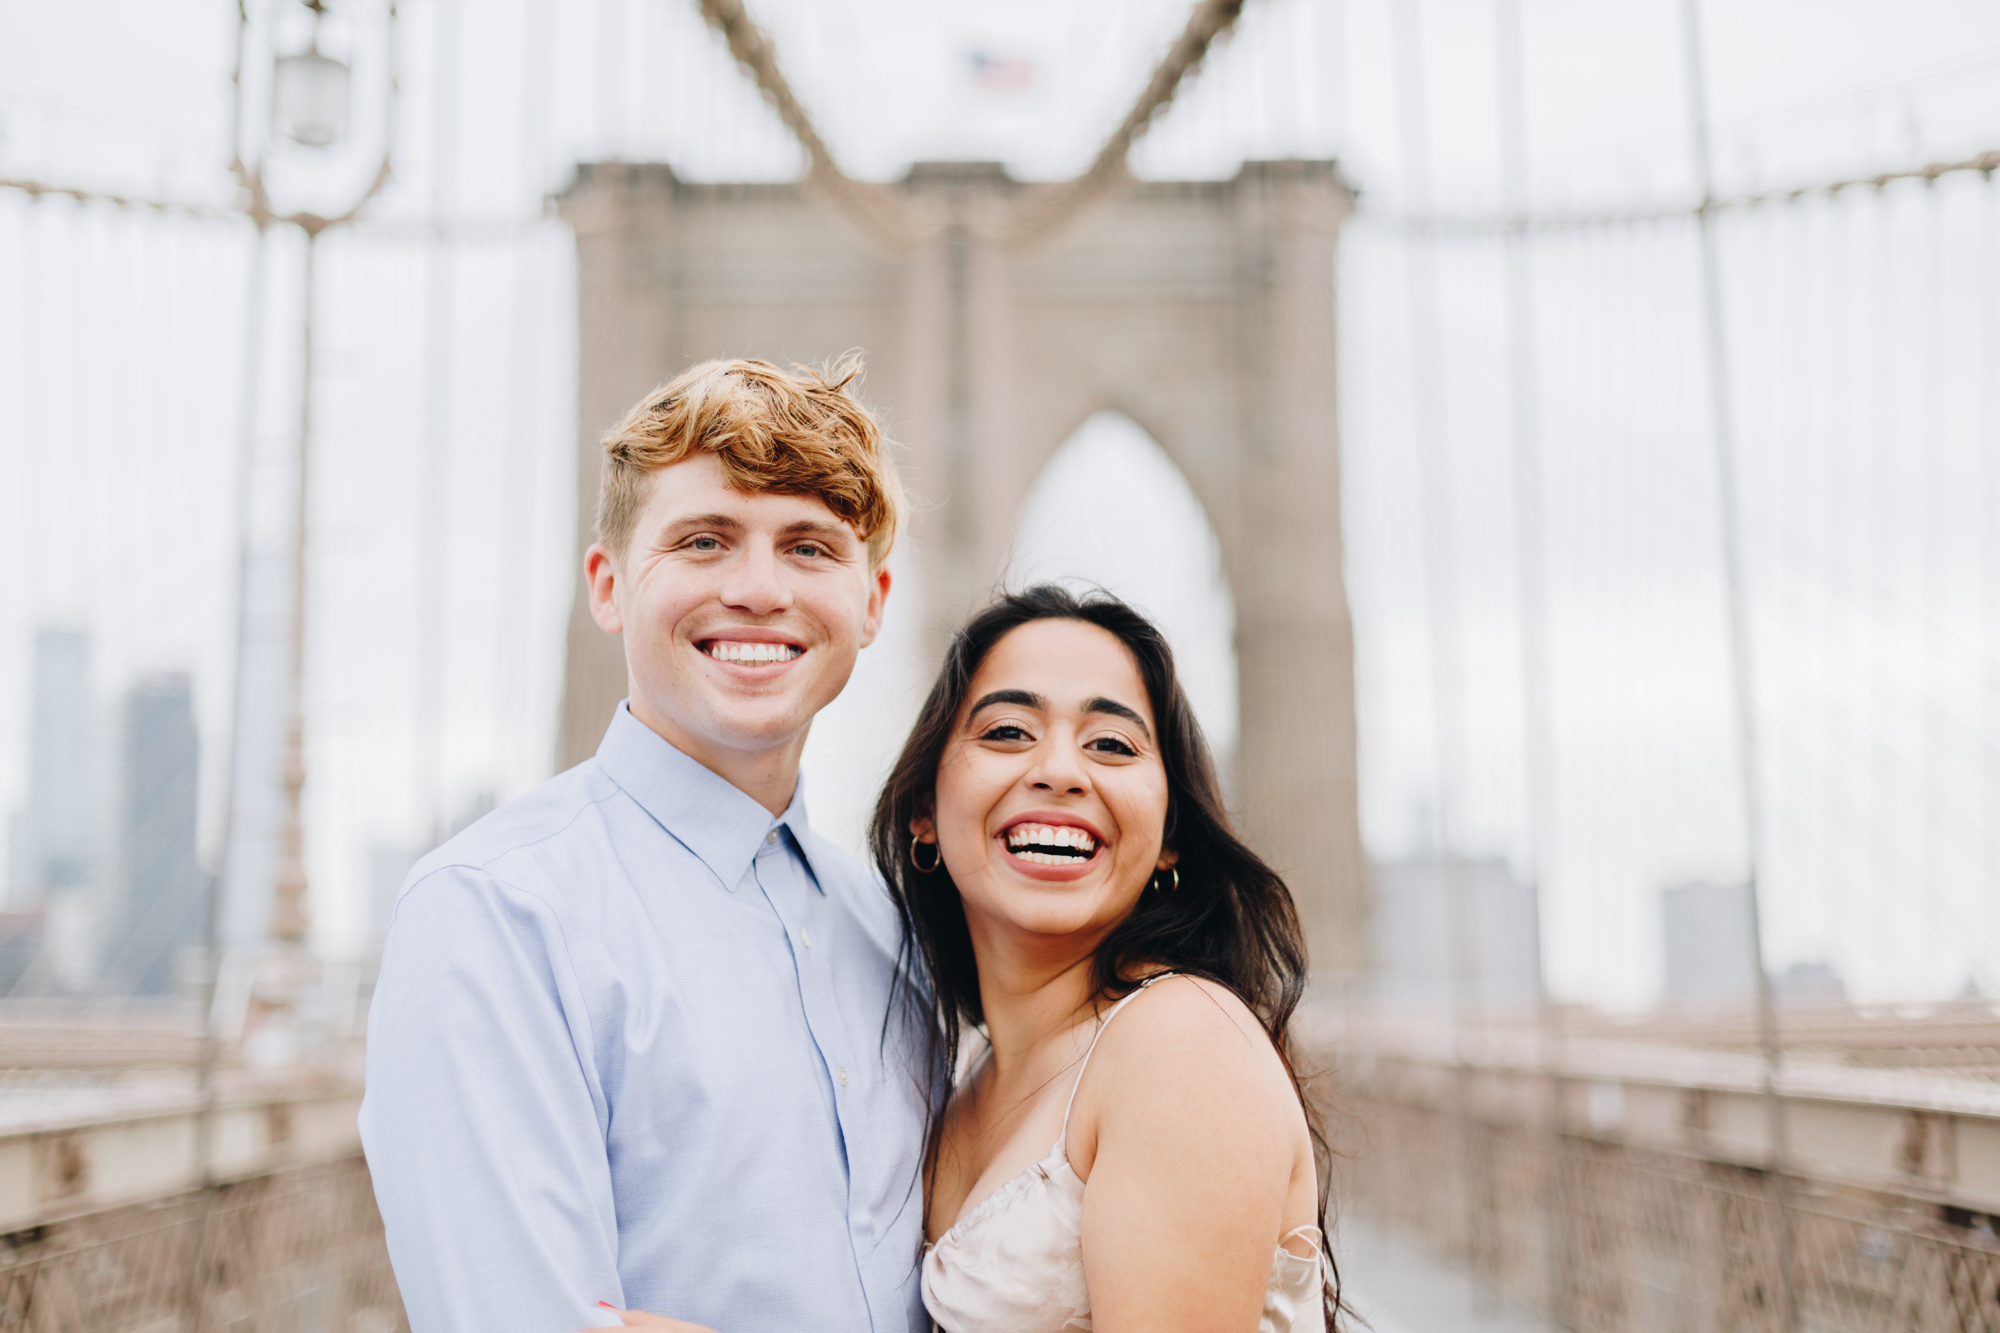 Picture-Perfect Summertime Brooklyn Bridge Engagement Photos